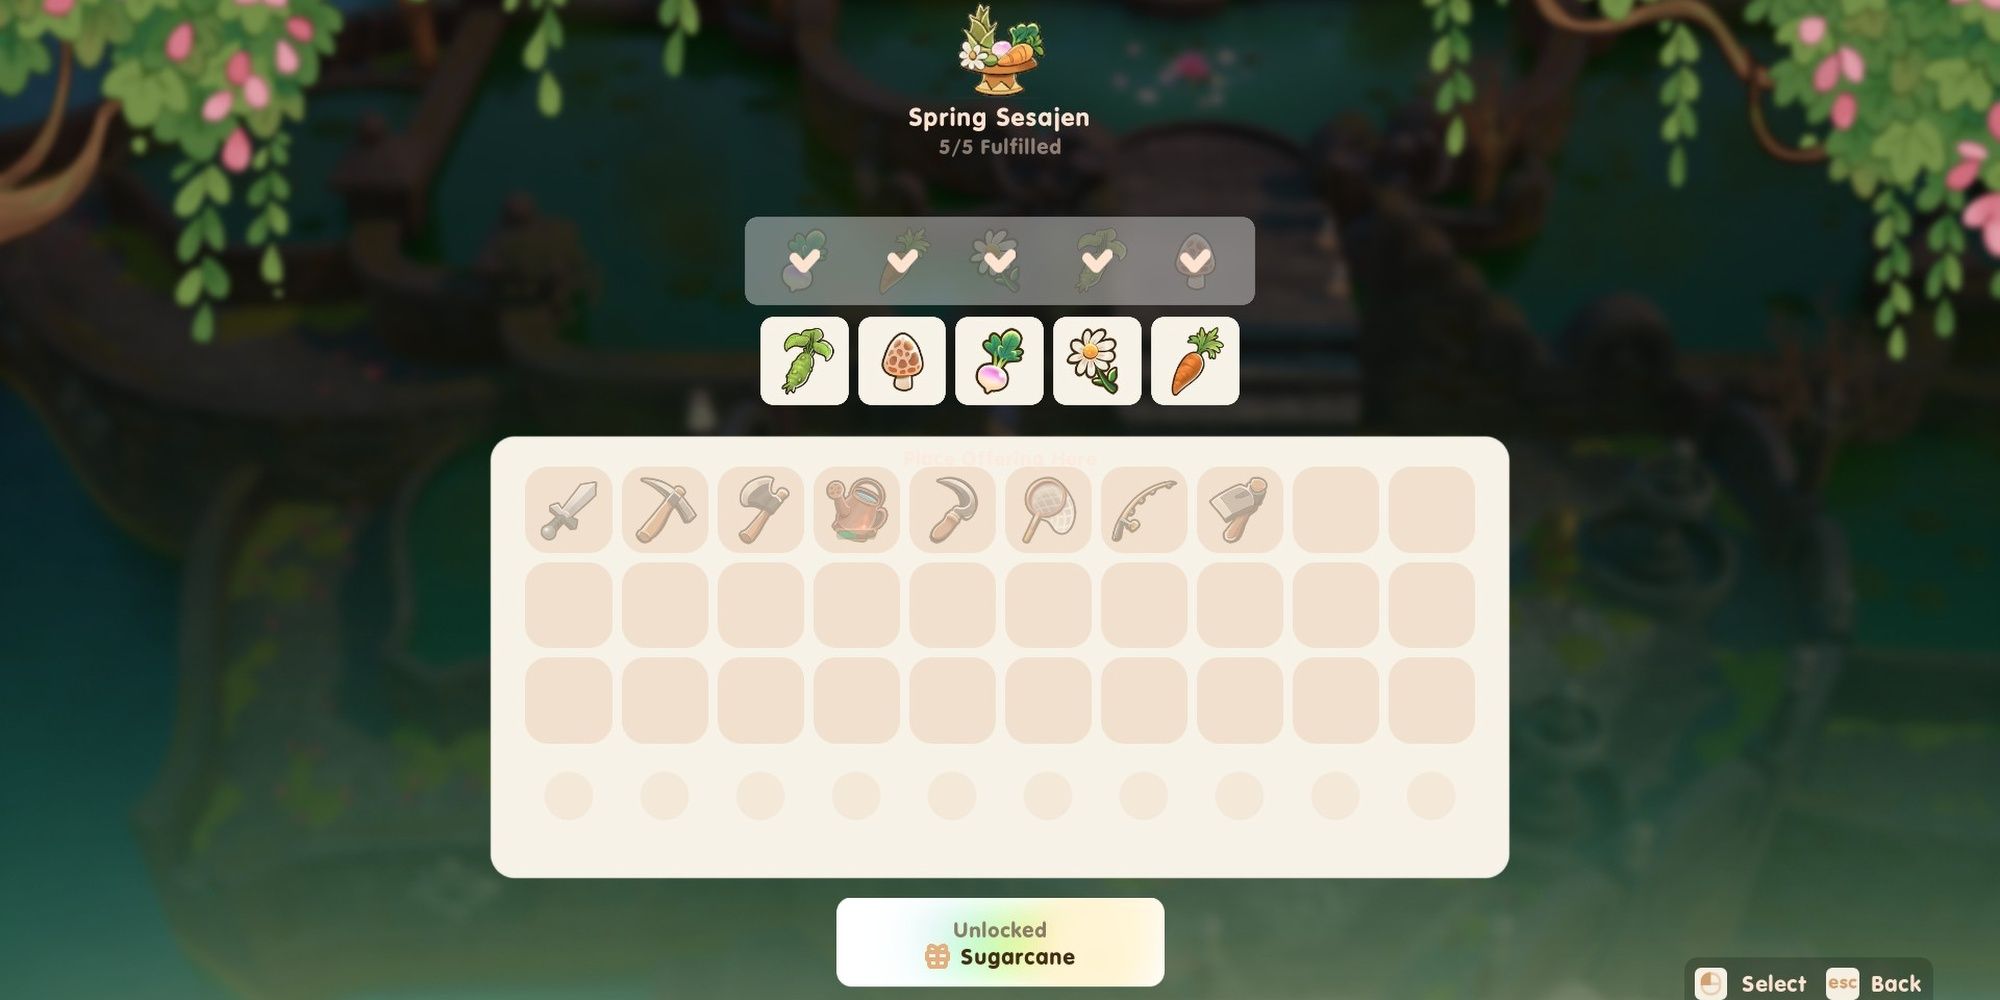 Coral Island Sugarcane seeds being unlocked at the shrine